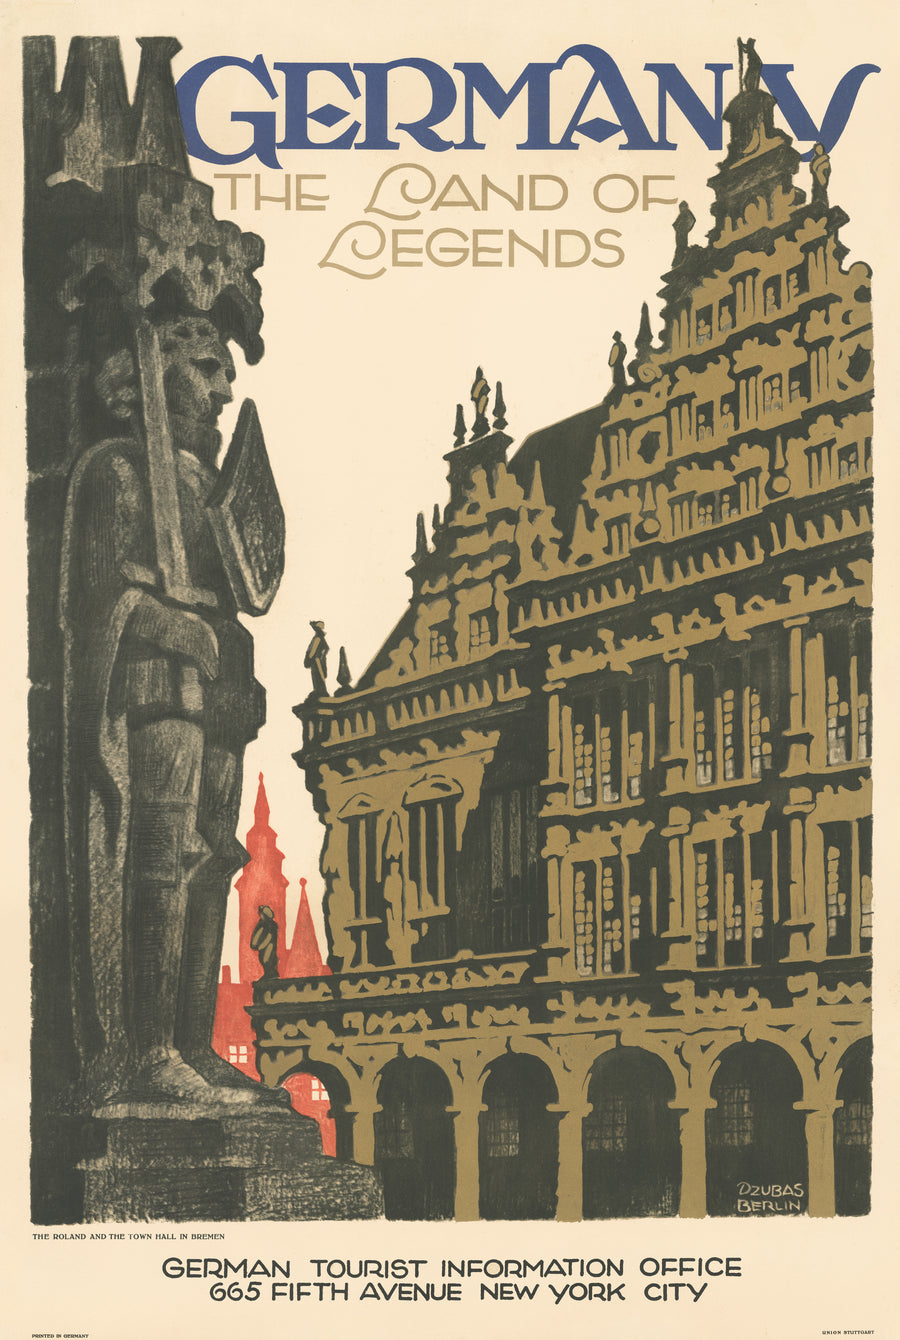 Vintage Travel Poster  Germany: The Land of Legends By: Friedel Dzubas